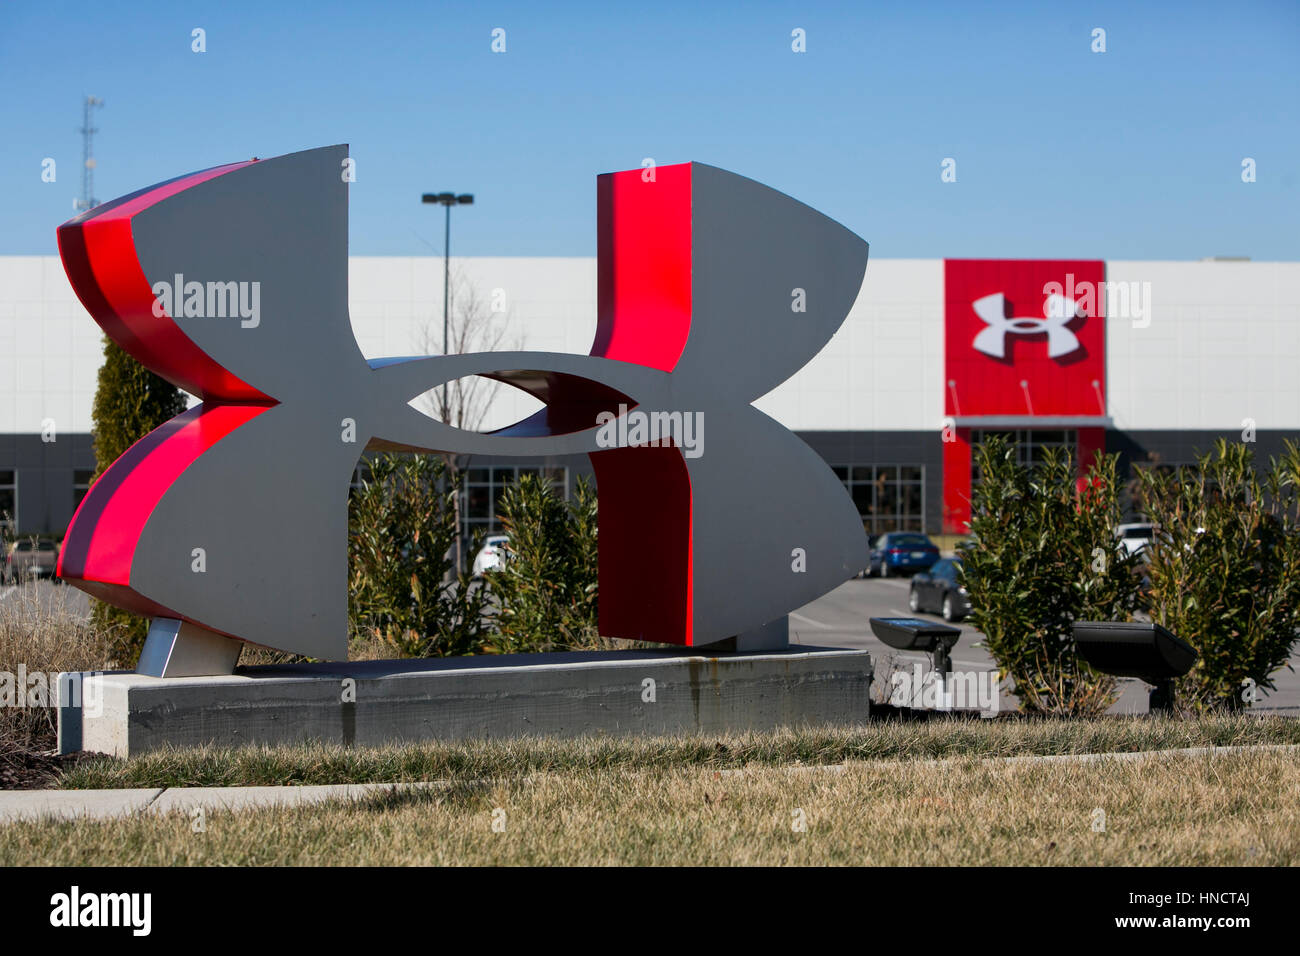 A logo sign outside of a facility occupied by Under Armour, Inc., in Mt.  Juliet, Tennessee on February 4, 2017 Stock Photo - Alamy